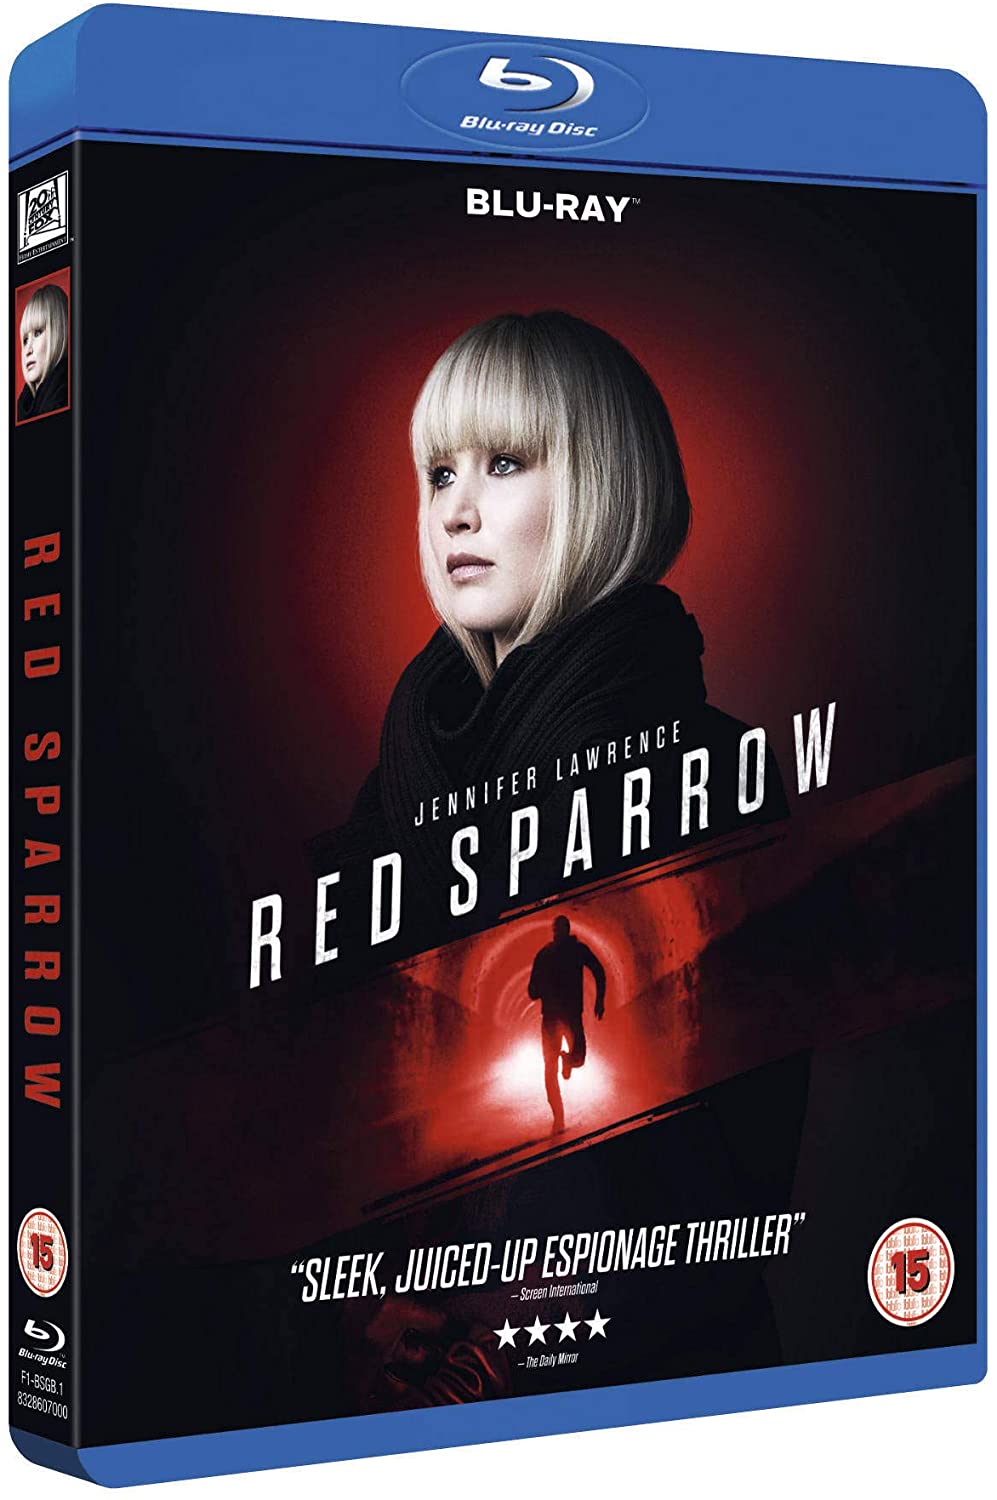 Red Sparrow – Thriller [Blu-ray]